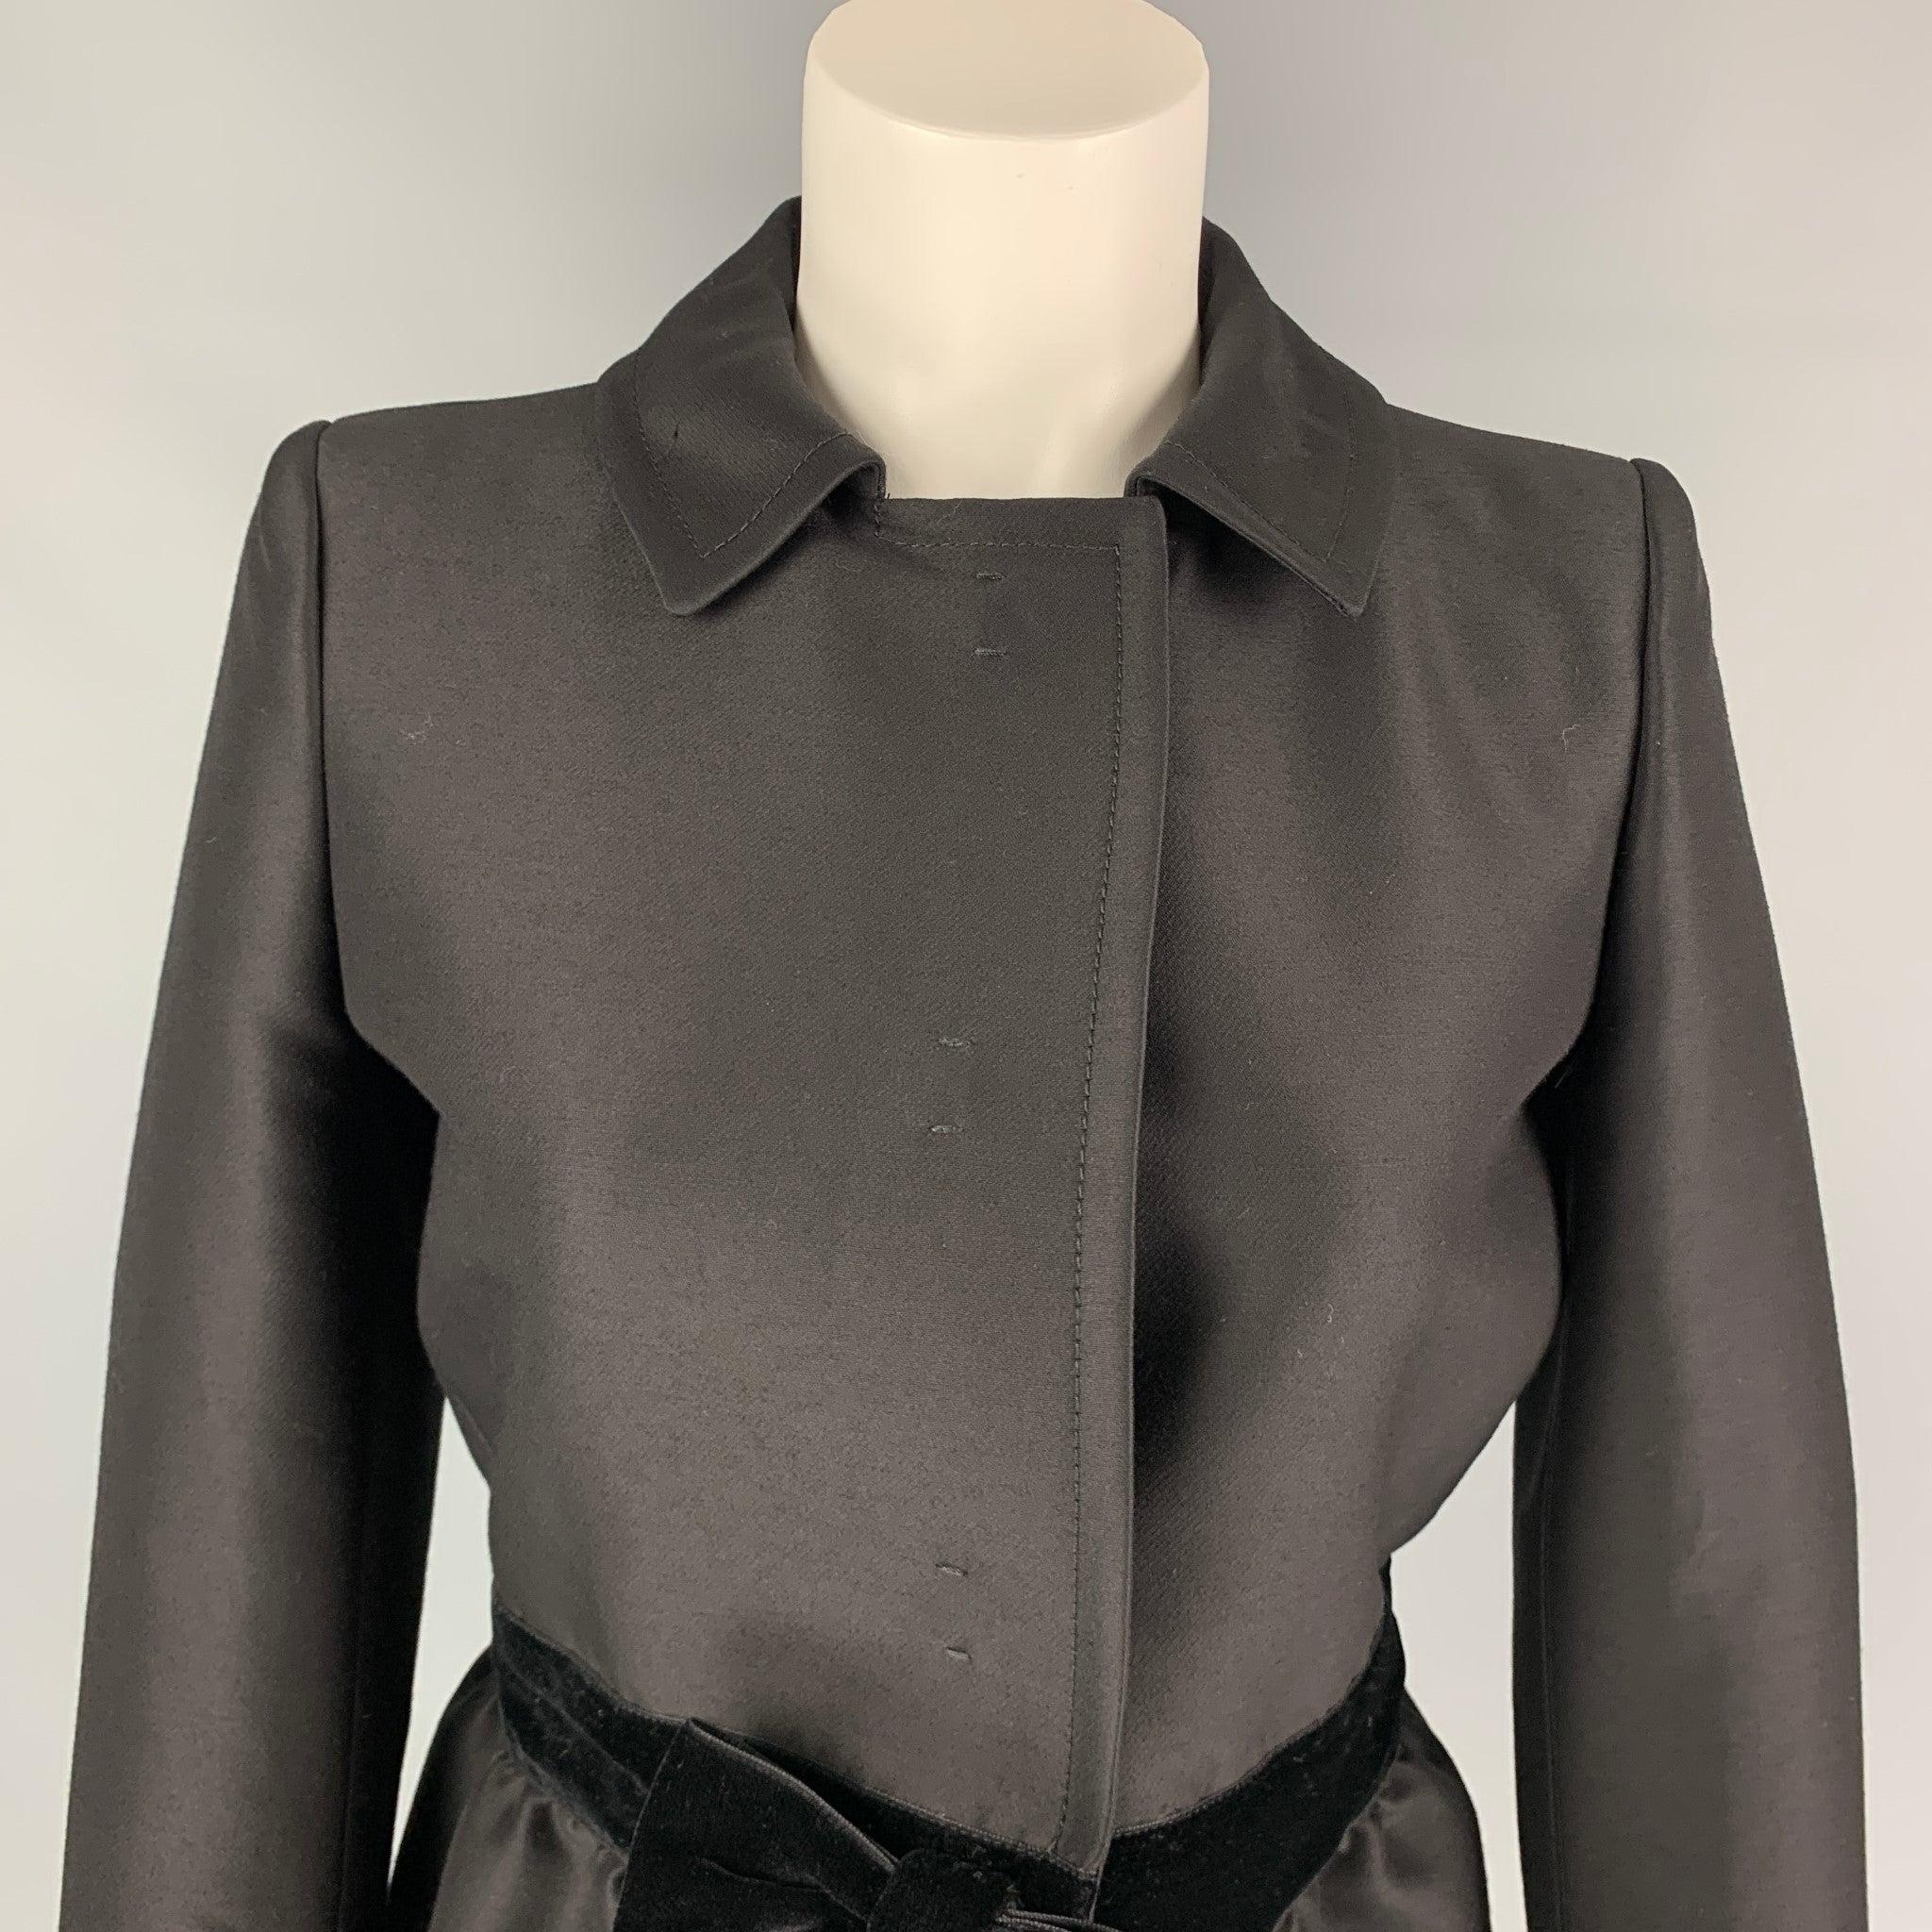 GIAMBATTISTA VALLI jacket comes in a black wool / silk with a full liner featuring a velvet bow detail, spread collar, and a hidden snap button closure. Made in Italy.New With Tags.  

Marked:   42 

Measurements: 
 
Shoulder: 14.5 inches  Bust: 36